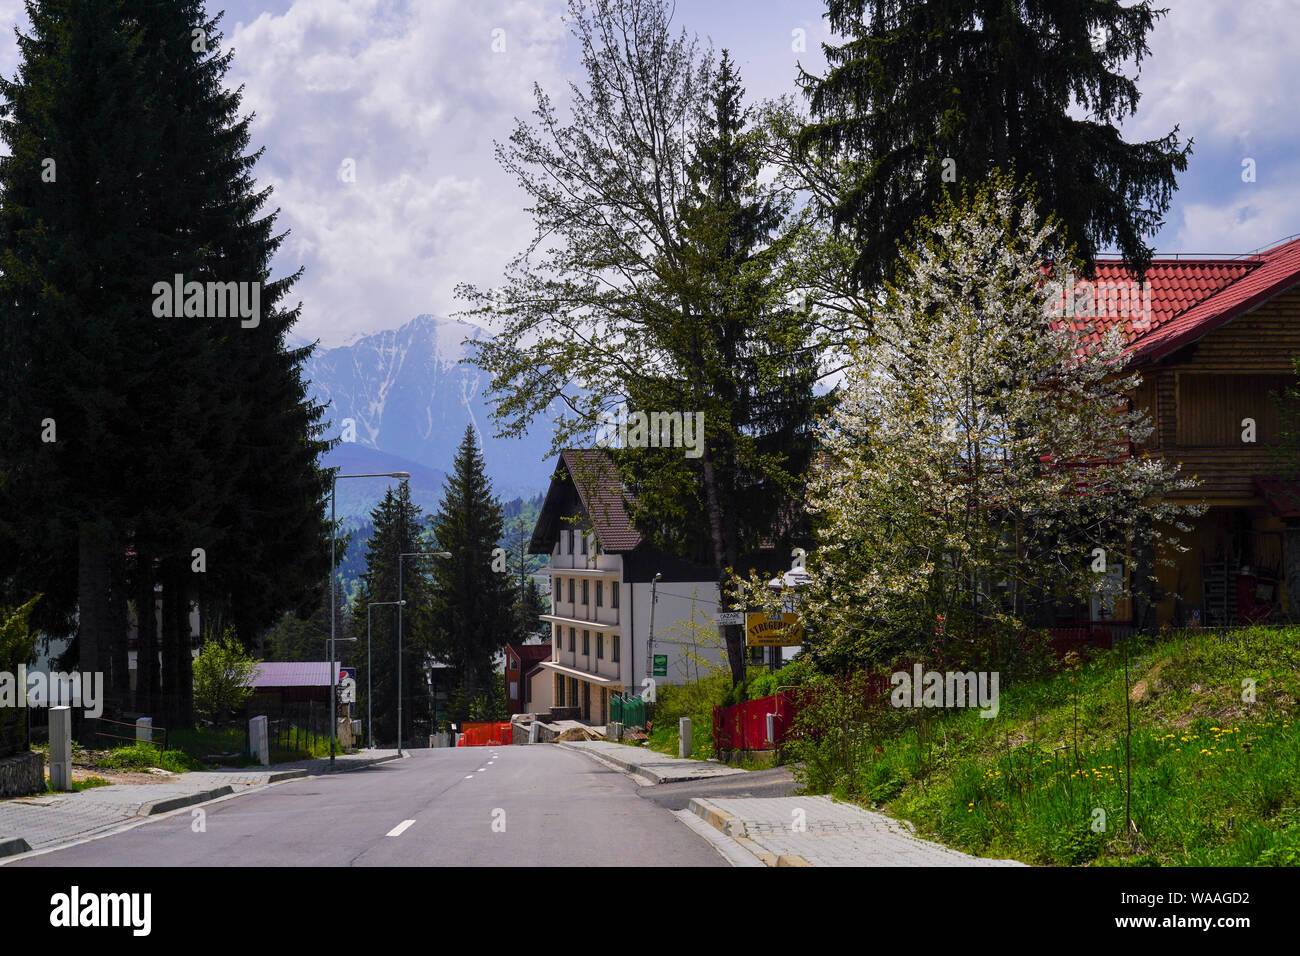 Predeal is a mountain resort town in Brasov County, Romania. Stock Photo